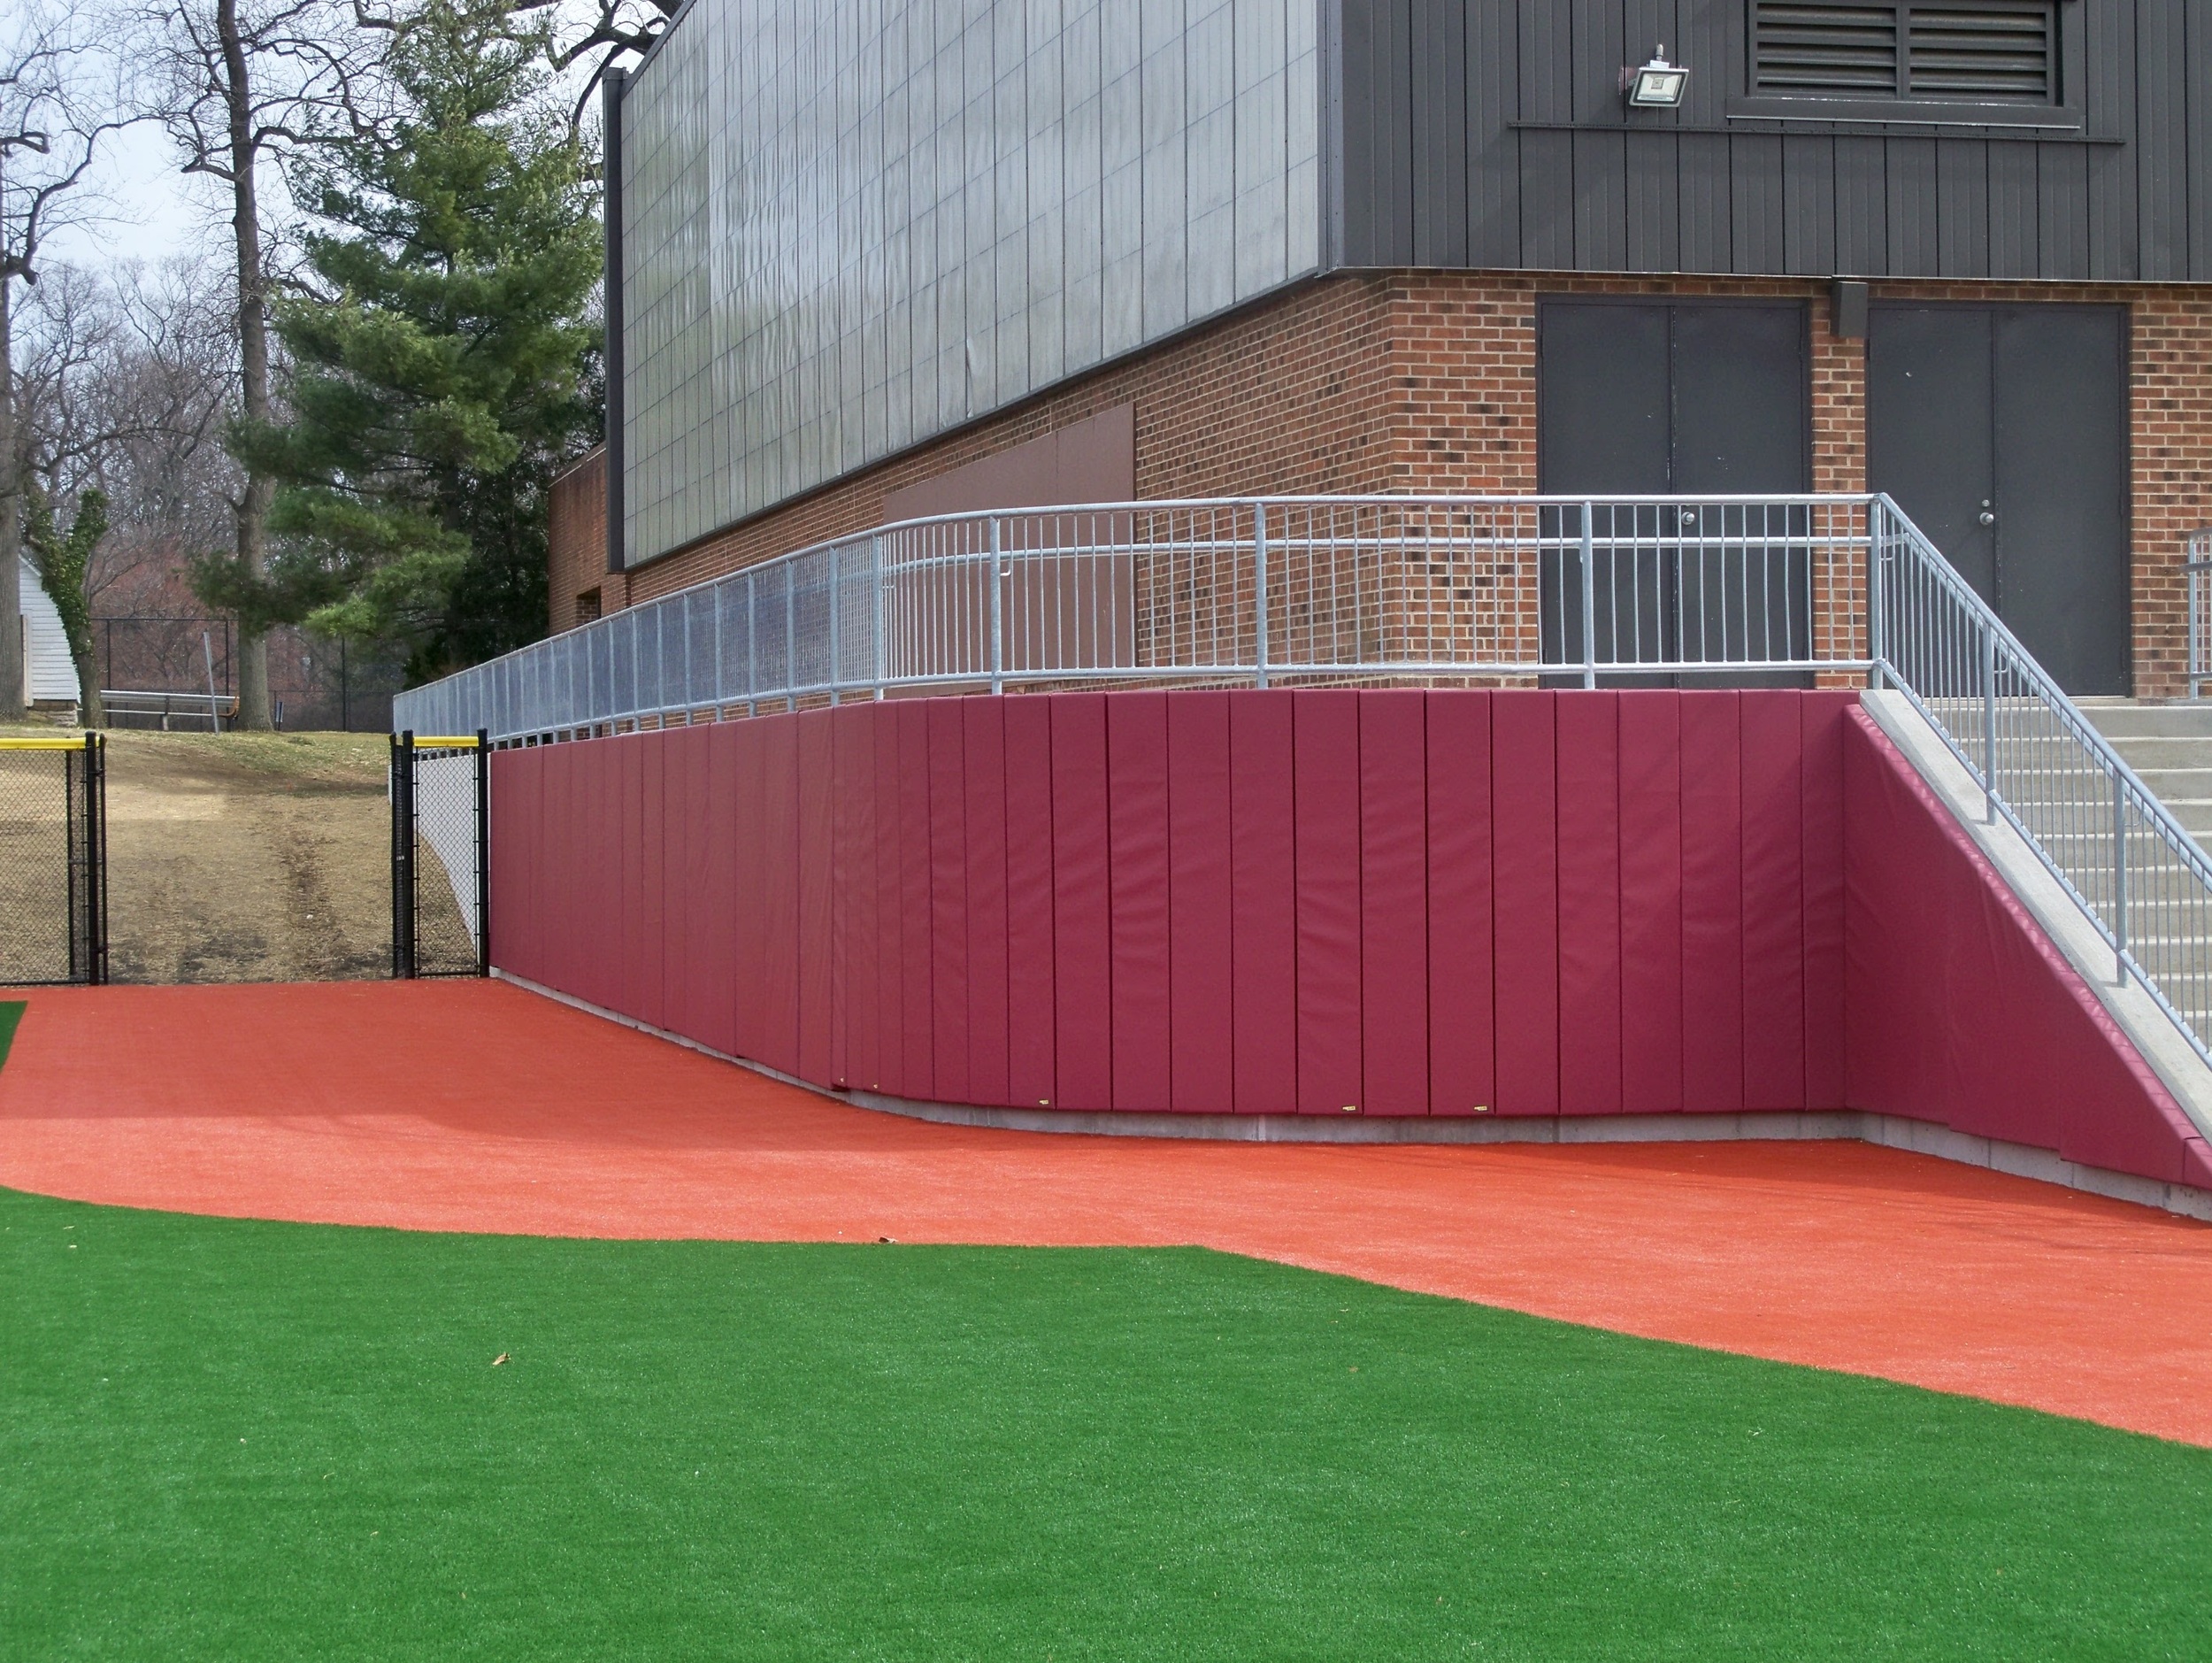 SJU 005 03.09.12 Curved Wall Padding at BB Outfield.jpg